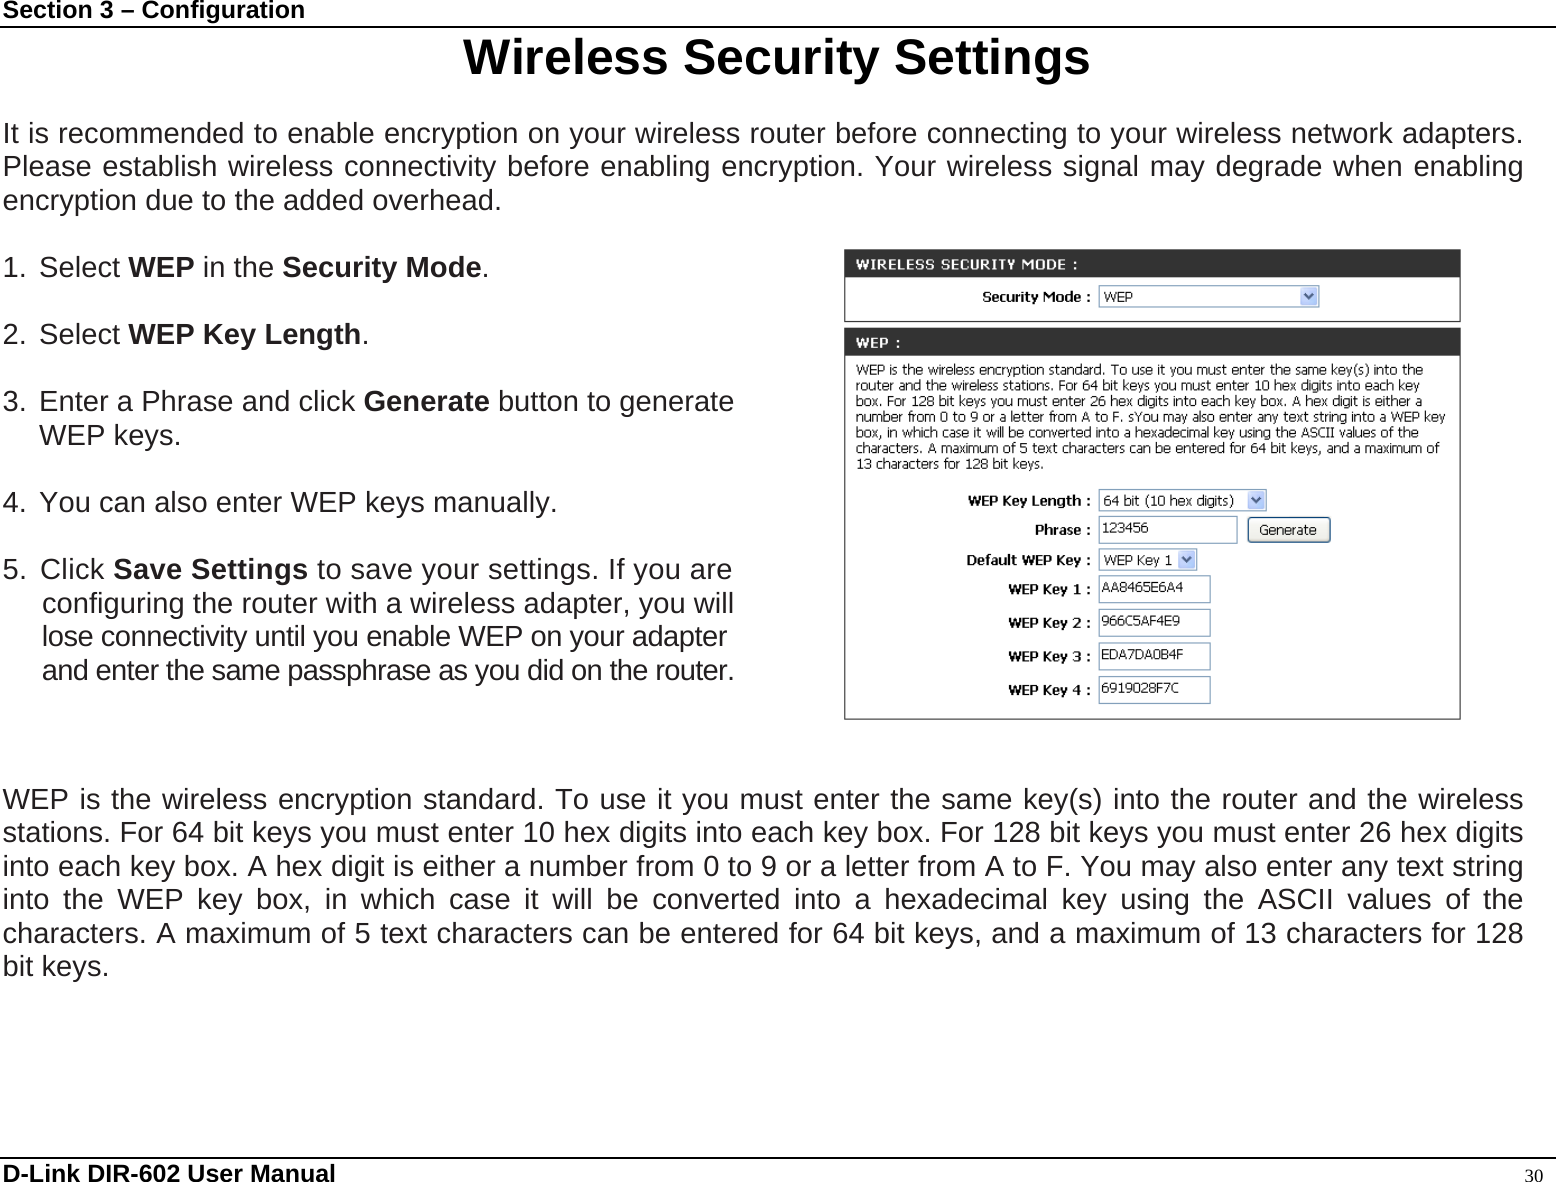 Section 3 – Configuration  Wireless Security Settings  It is recommended to enable encryption on your wireless router before connecting to your wireless network adapters. Please establish wireless connectivity before enabling encryption. Your wireless signal may degrade when enabling encryption due to the added overhead.  1. Select WEP in the Security Mode.  2. Select WEP Key Length.  3. Enter a Phrase and click Generate button to generate WEP keys.  4. You can also enter WEP keys manually.   5. Click Save Settings to save your settings. If you are configuring the router with a wireless adapter, you will lose connectivity until you enable WEP on your adapter and enter the same passphrase as you did on the router.    WEP is the wireless encryption standard. To use it you must enter the same key(s) into the router and the wireless stations. For 64 bit keys you must enter 10 hex digits into each key box. For 128 bit keys you must enter 26 hex digits into each key box. A hex digit is either a number from 0 to 9 or a letter from A to F. You may also enter any text string into the WEP key box, in which case it will be converted into a hexadecimal key using the ASCII values of the characters. A maximum of 5 text characters can be entered for 64 bit keys, and a maximum of 13 characters for 128 bit keys.      D-Link DIR-602 User Manual                                                                                               30 